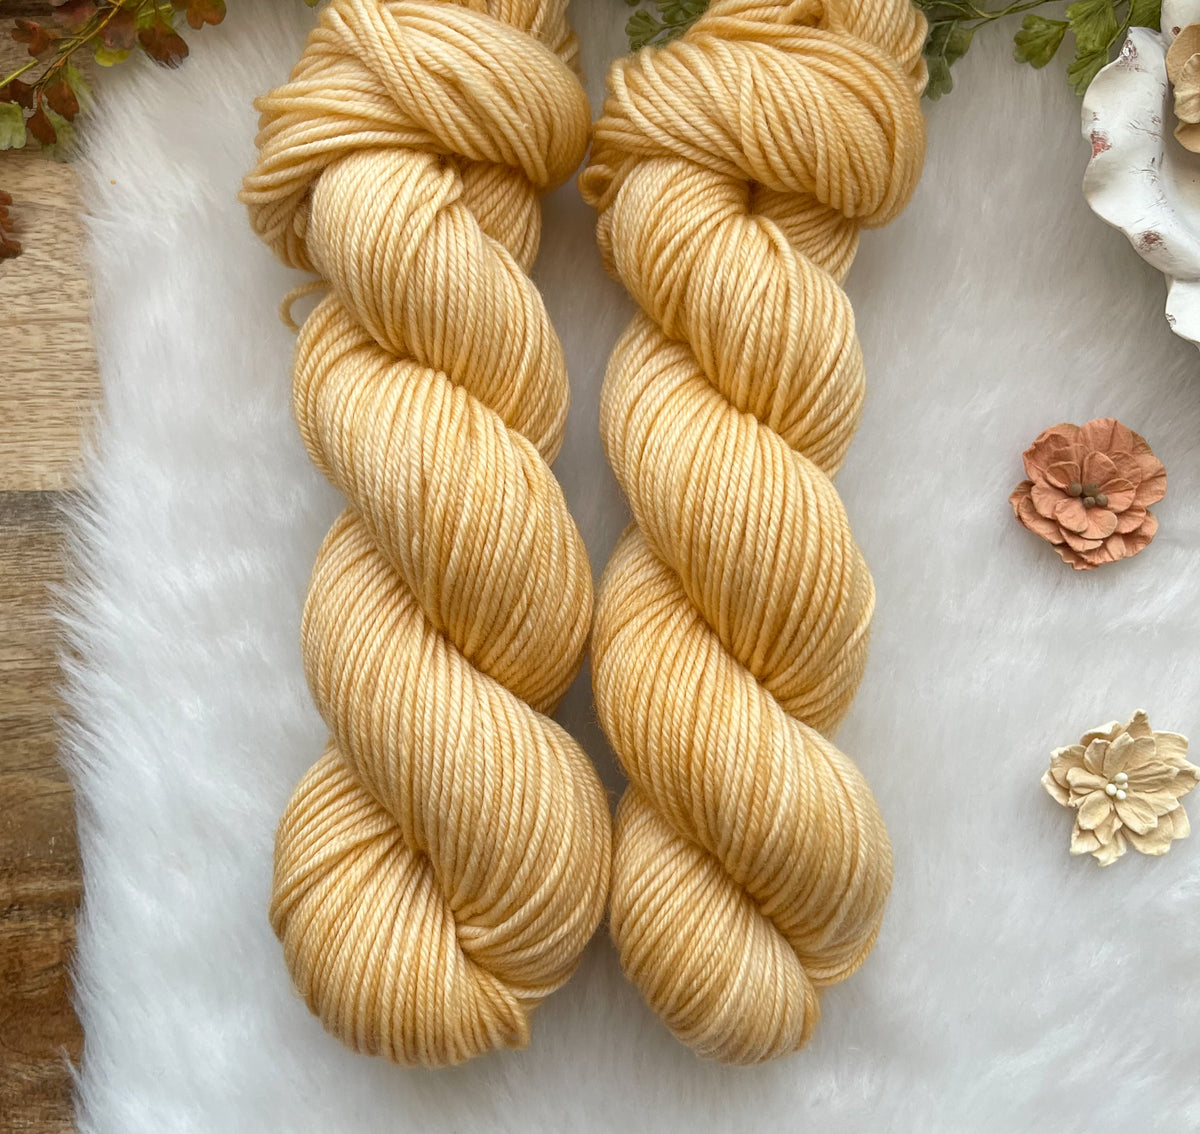 Hand Dyed Yarn wheat Kings Yellow Blonde Gold Tan Brown Speckled